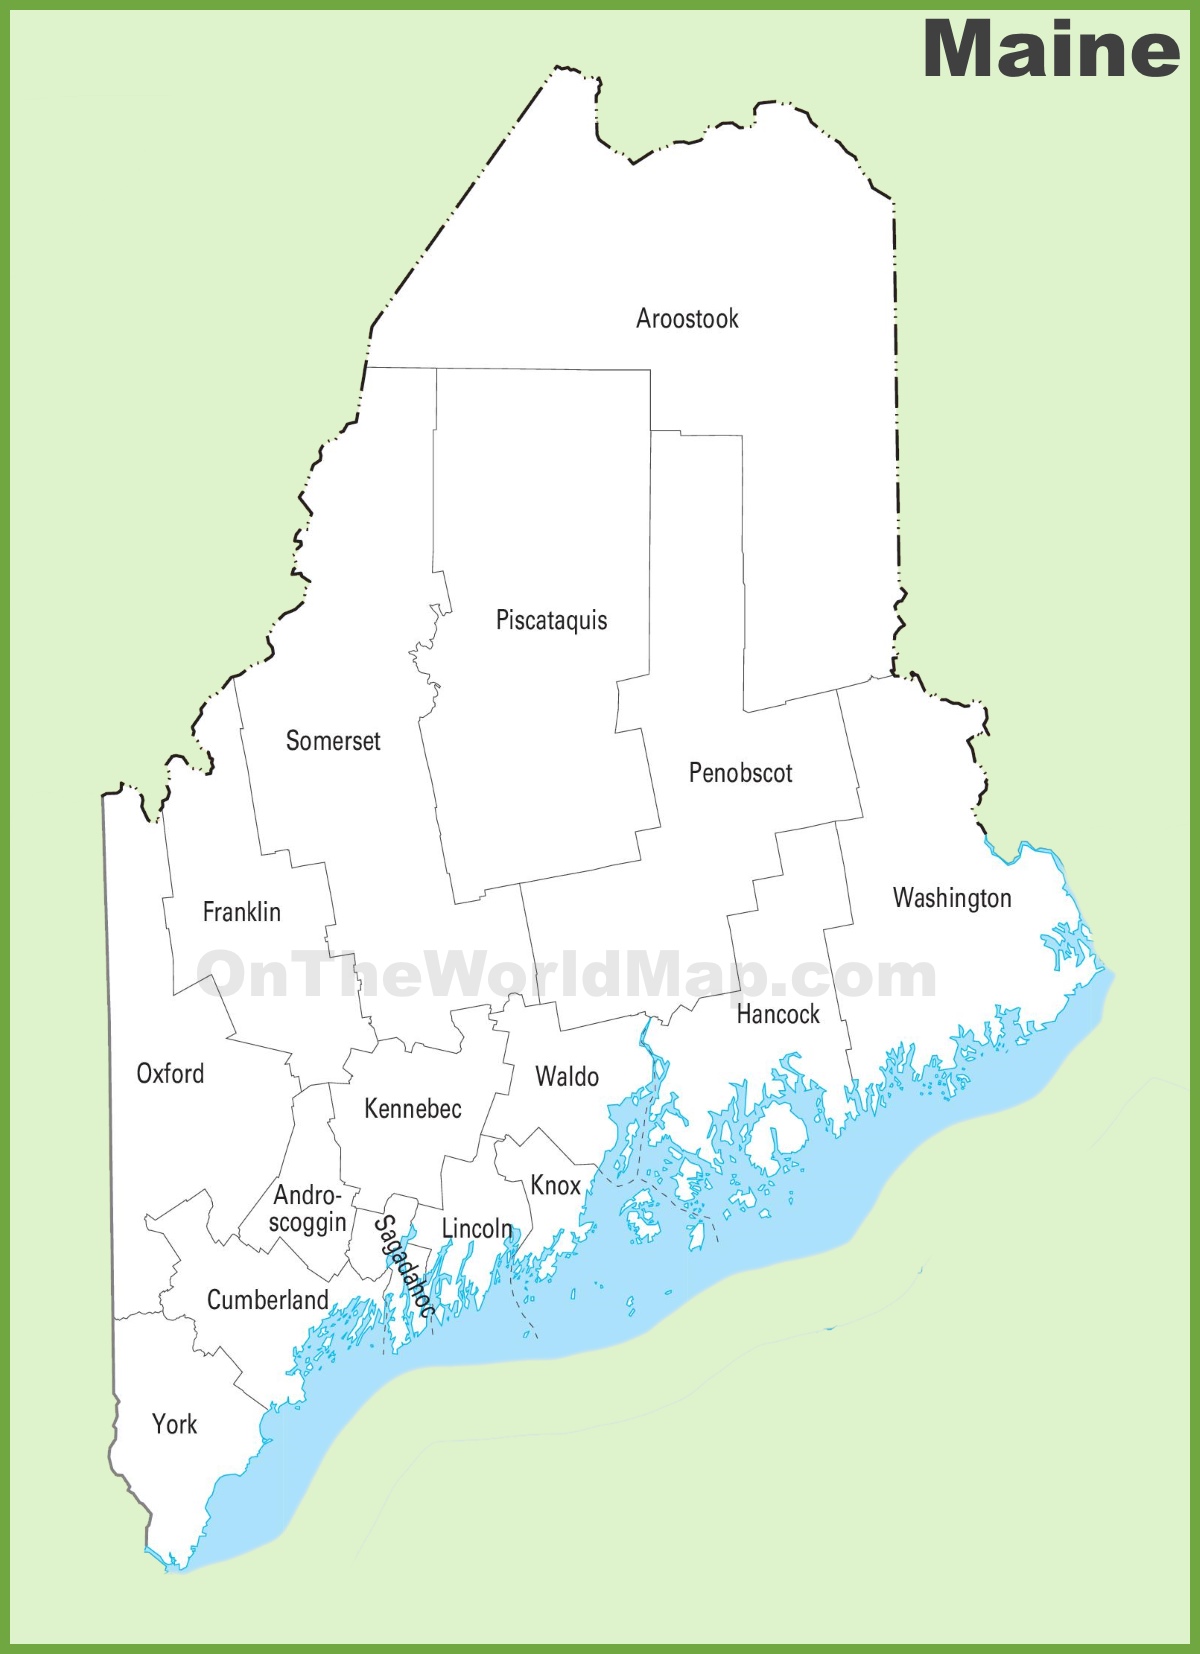 Description: This map shows counties of Maine. 